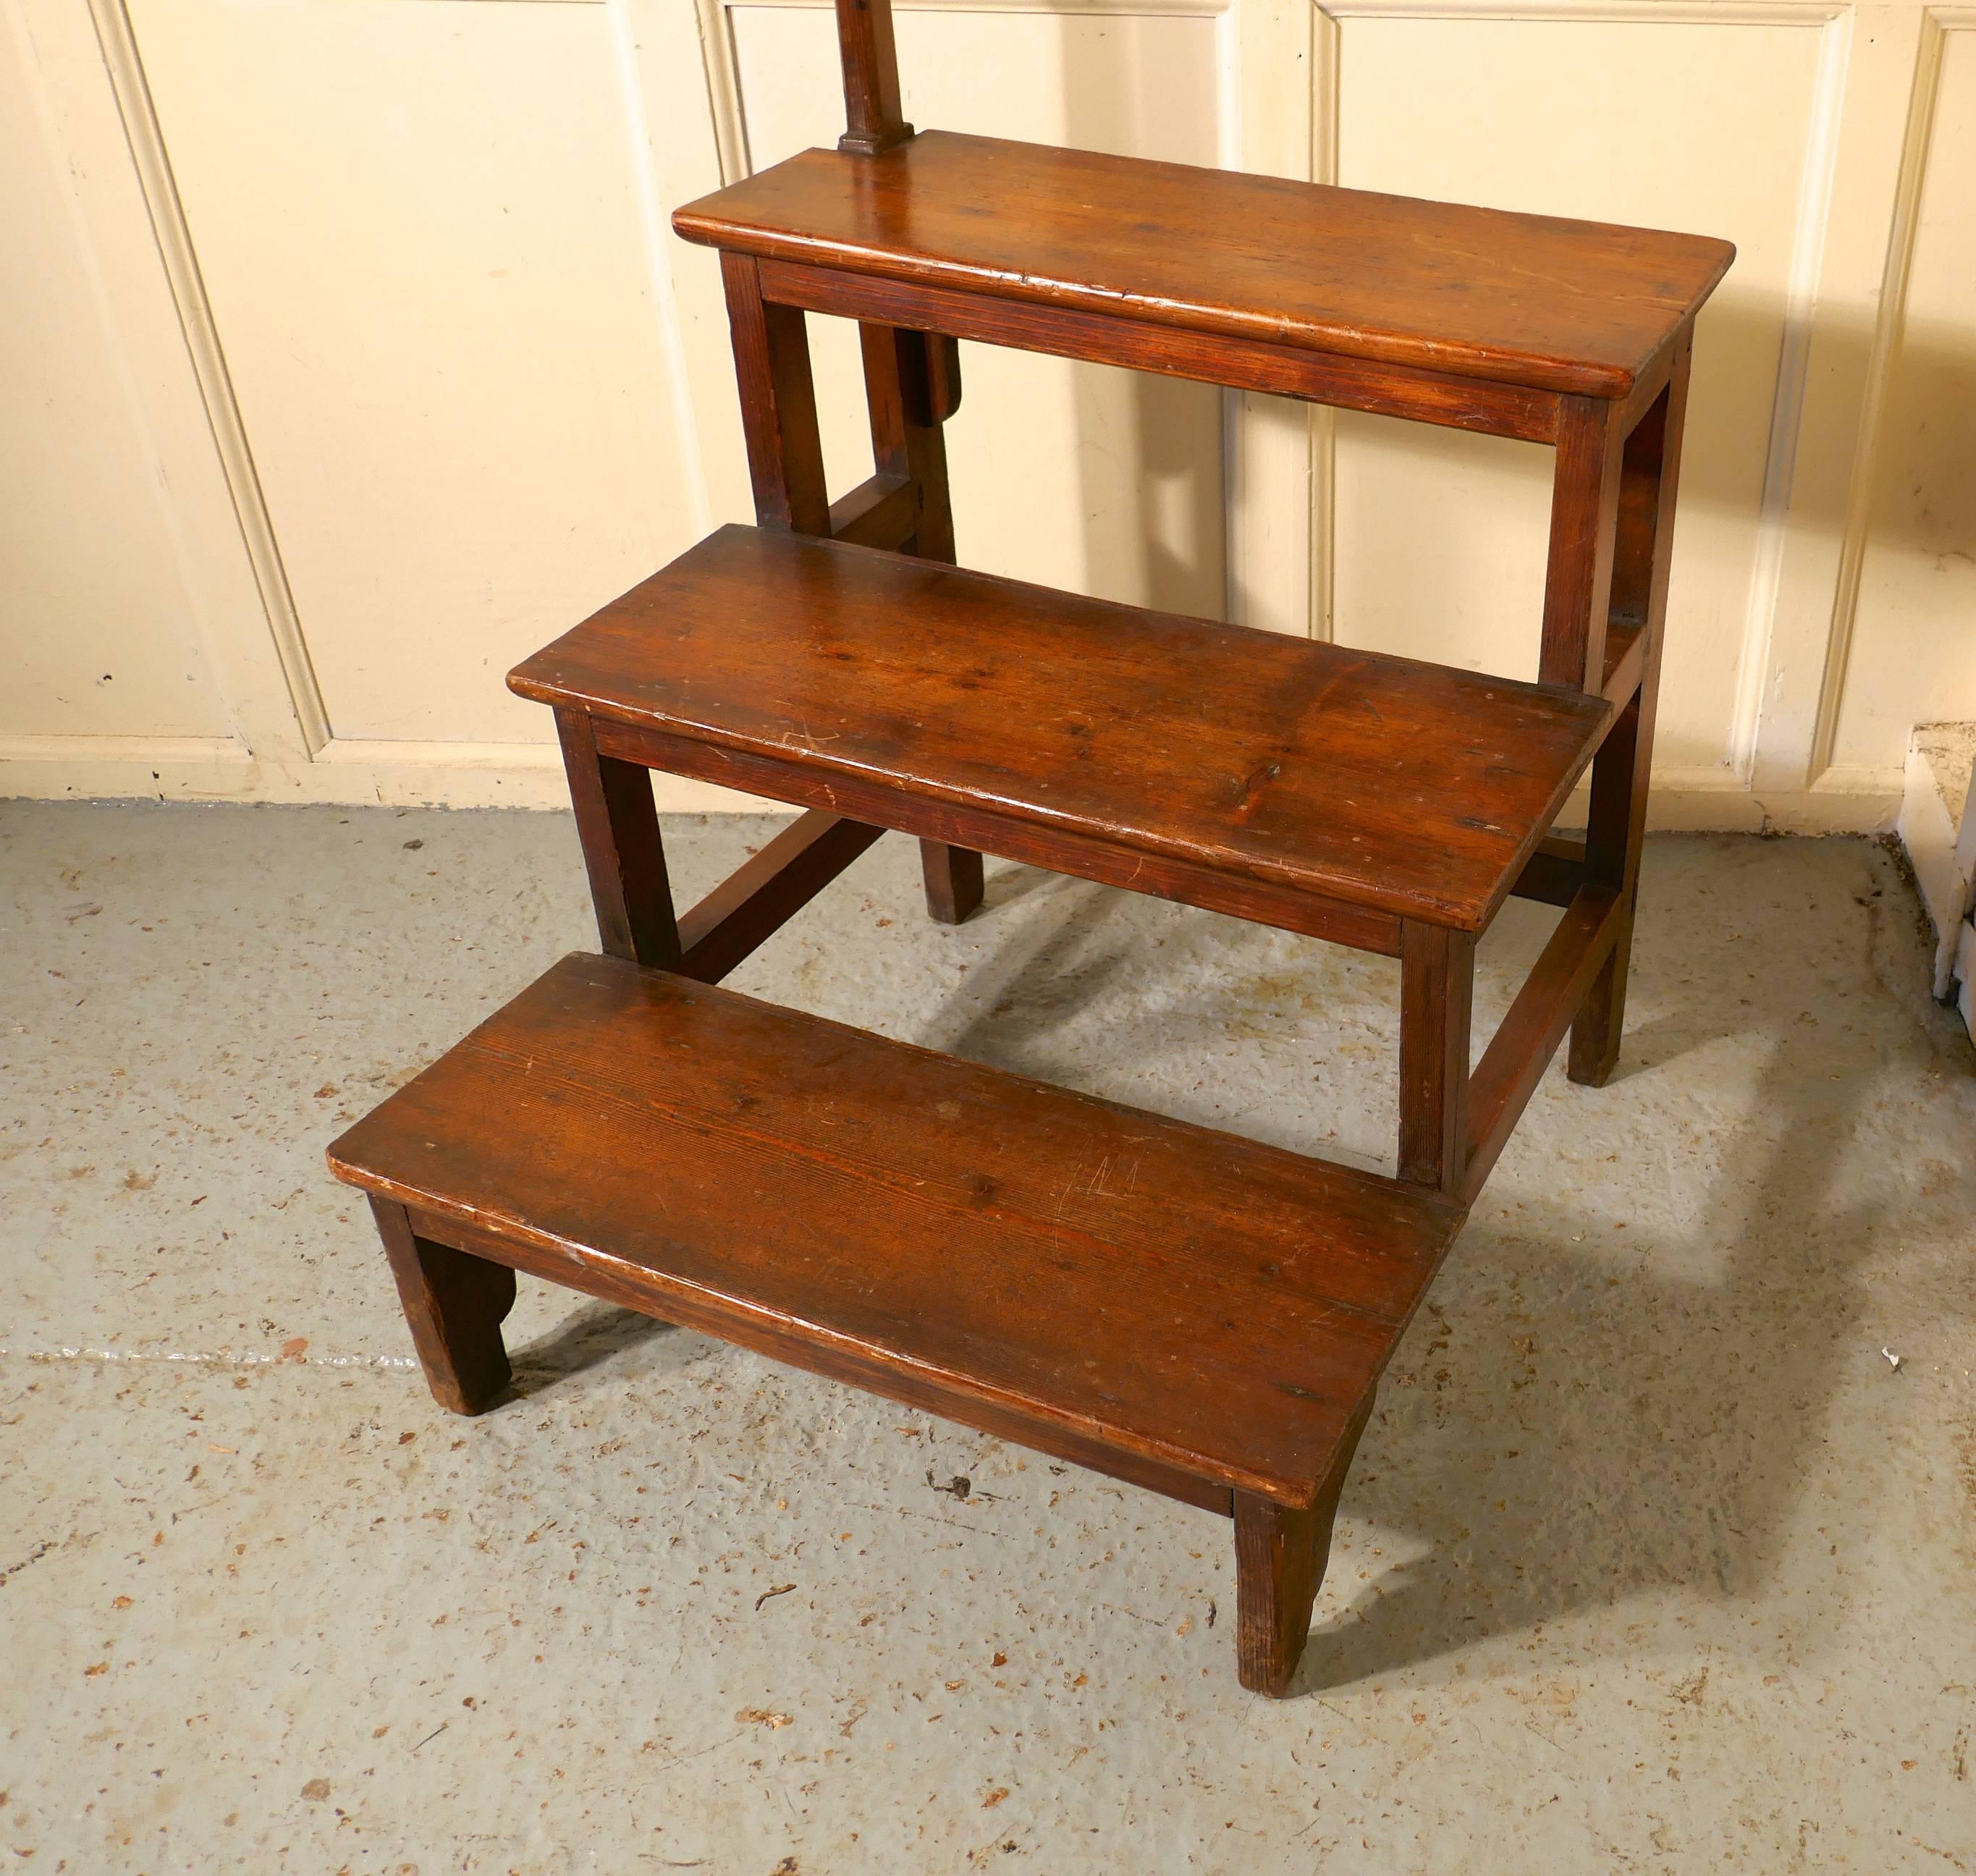 French rustic pine shop steps

This charming set of steps come from France, they came from a French shop where they were used to reach the high shelves, they are very sturdy, a bit rustic looking, they are in the original dark finish pine
The